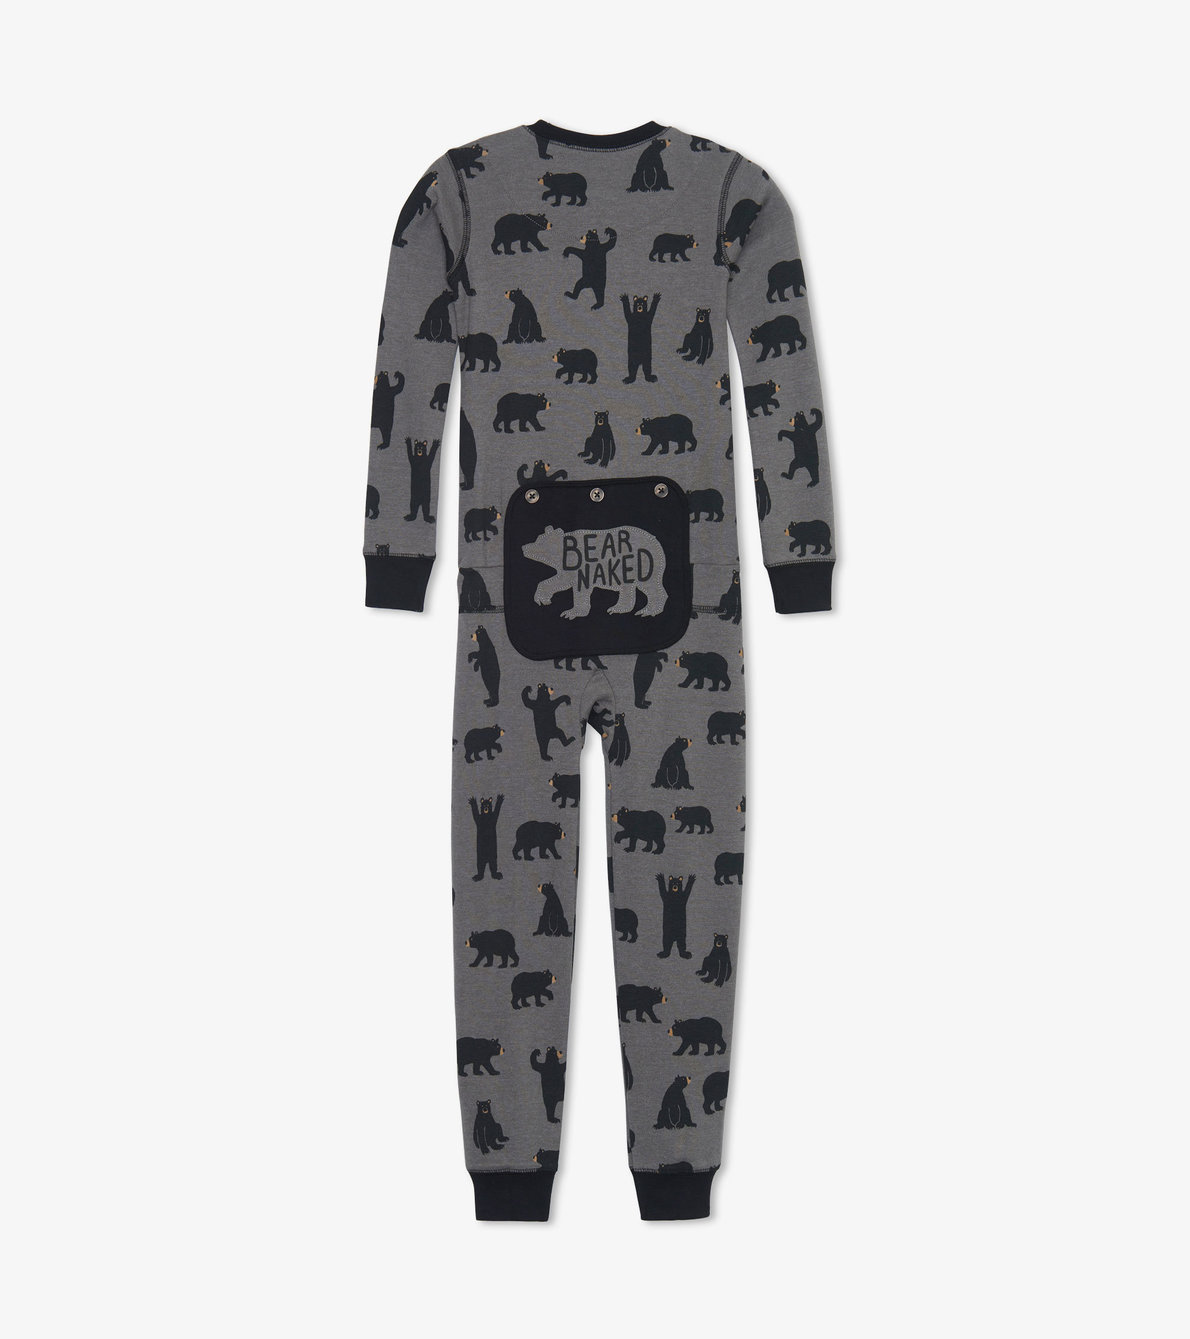 View larger image of Charcoal Bears Kids Union Suit